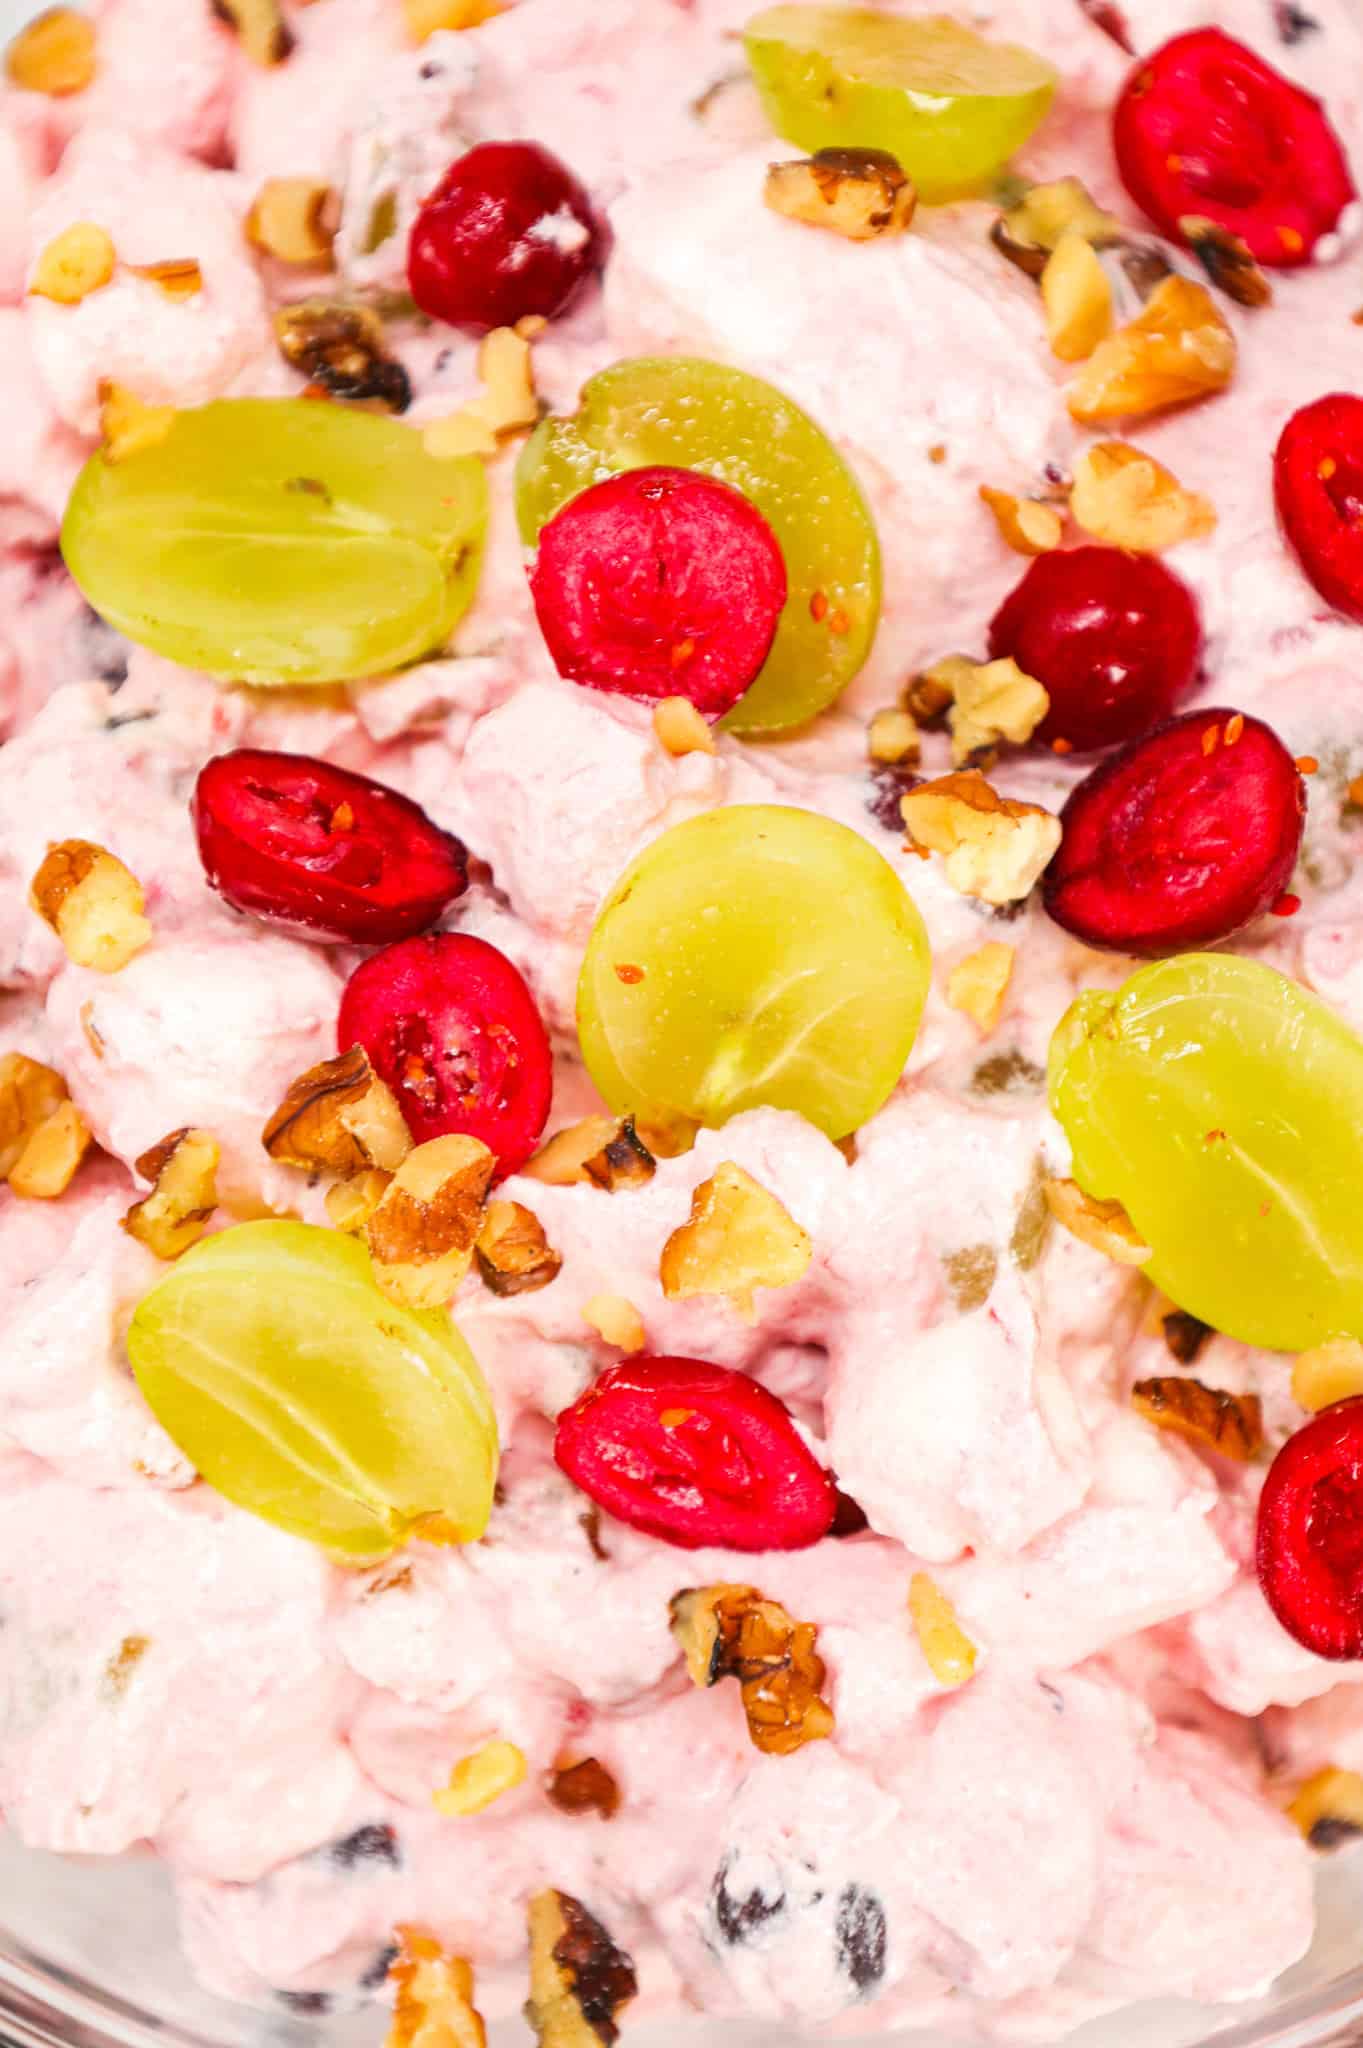 Cranberry Fluff is a delicious Thanksgiving side dish recipe made with whole berry cranberry sauce, chopped green grapes, Cool whip, mini marshmallows and chopped walnuts.